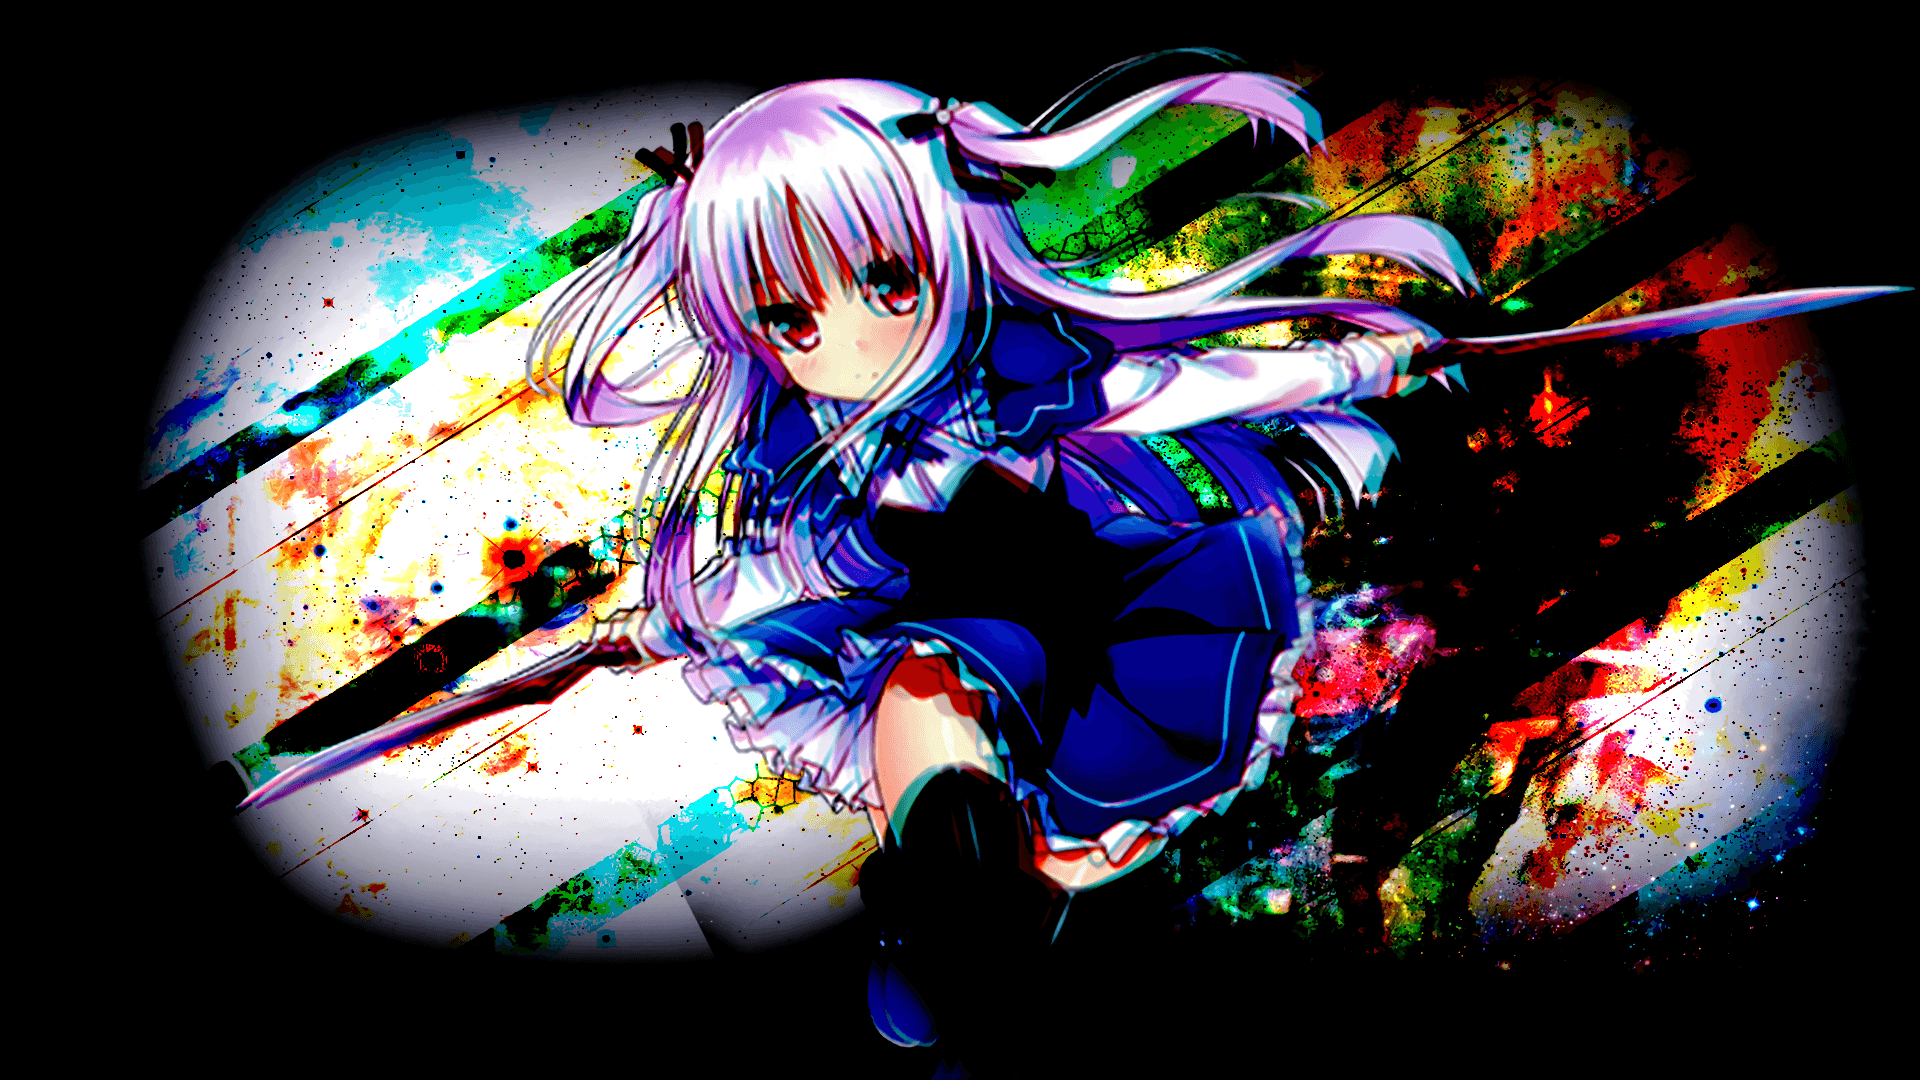 Absolute Duo Computer Wallpapers, Desktop Backgrounds, 1920x1080, ID:710675